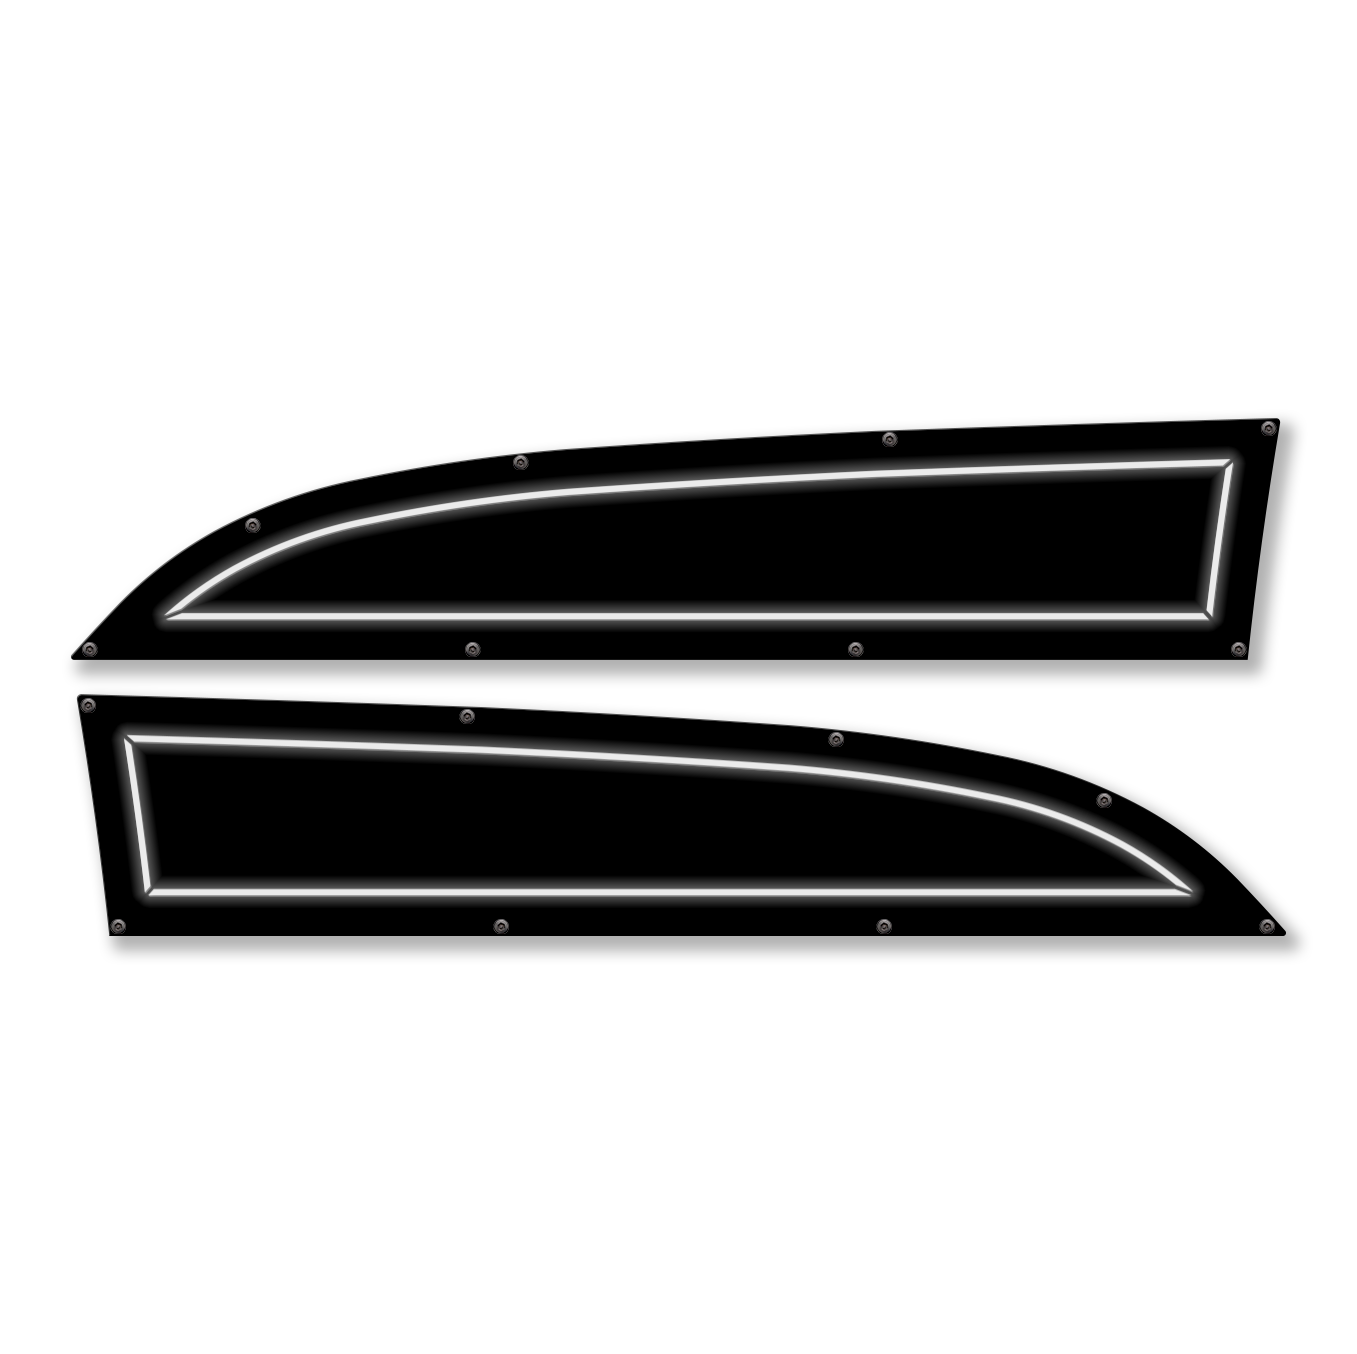 Border 11-16 Ford® Super Duty® Fender Badge Replacements - Fully Customizable, LED and Non-LED